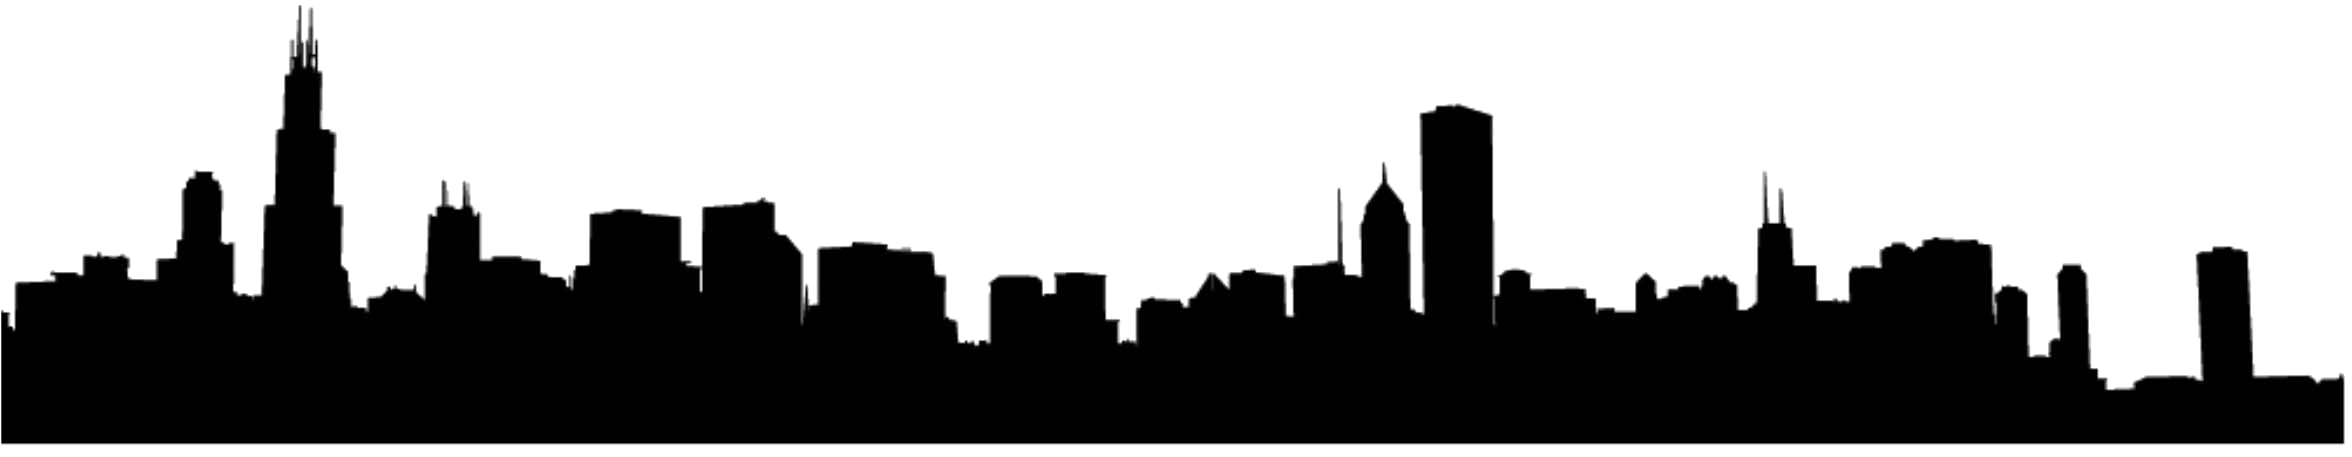 Chicago Skyline Silhouette - city png download - 2352*457 - Free